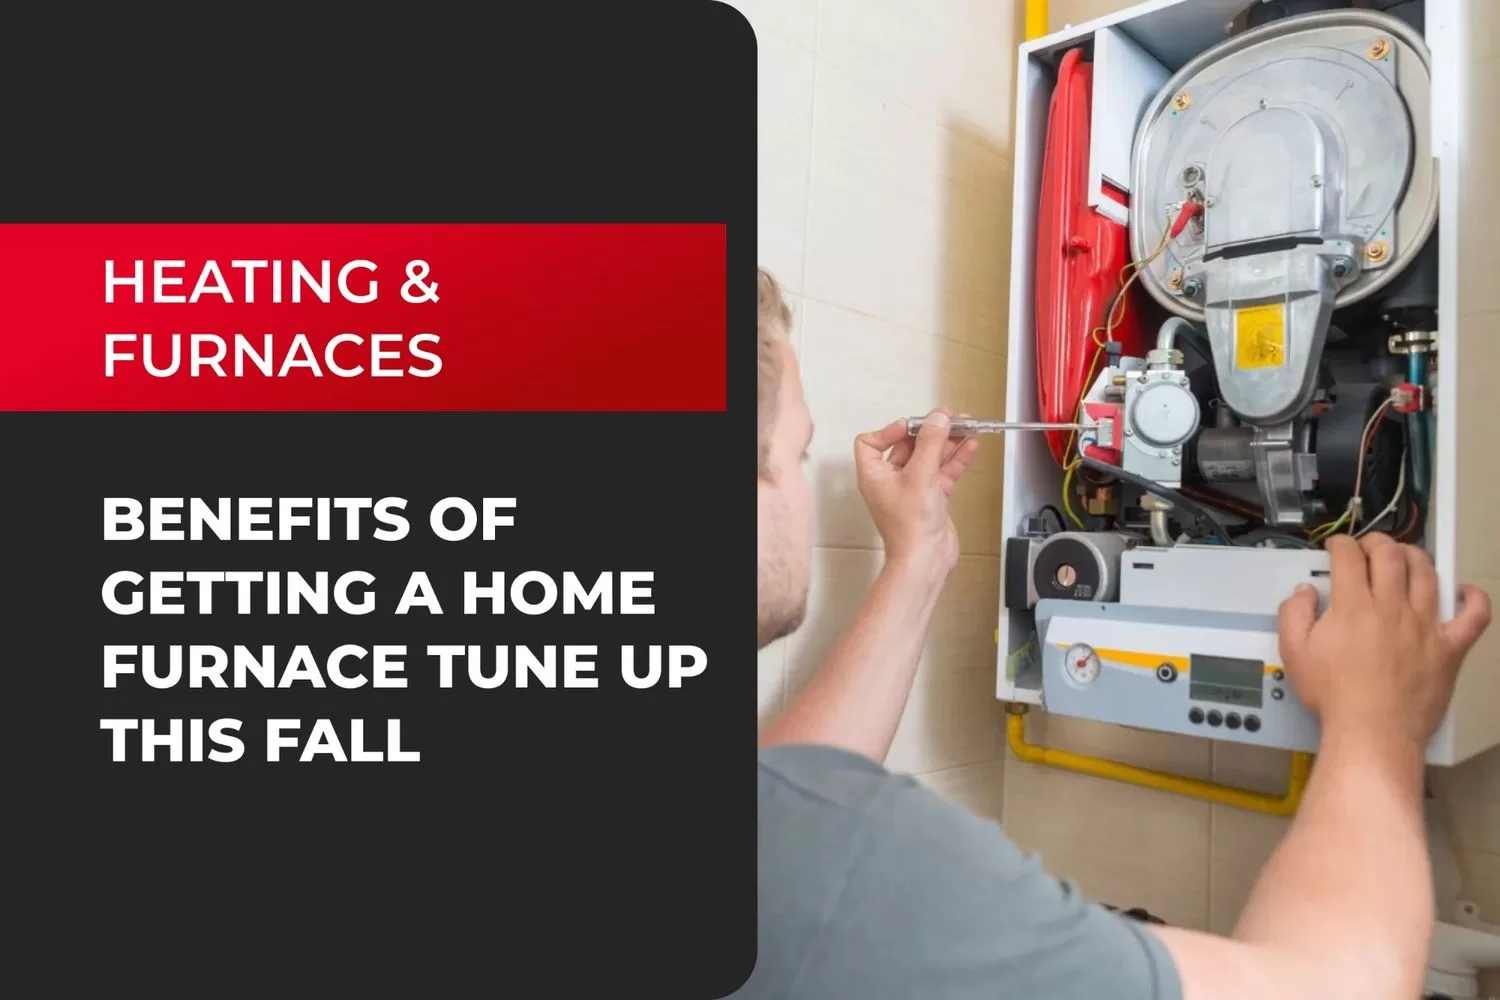 Benefits of Getting a Home Furnace Tune-Up this Fall